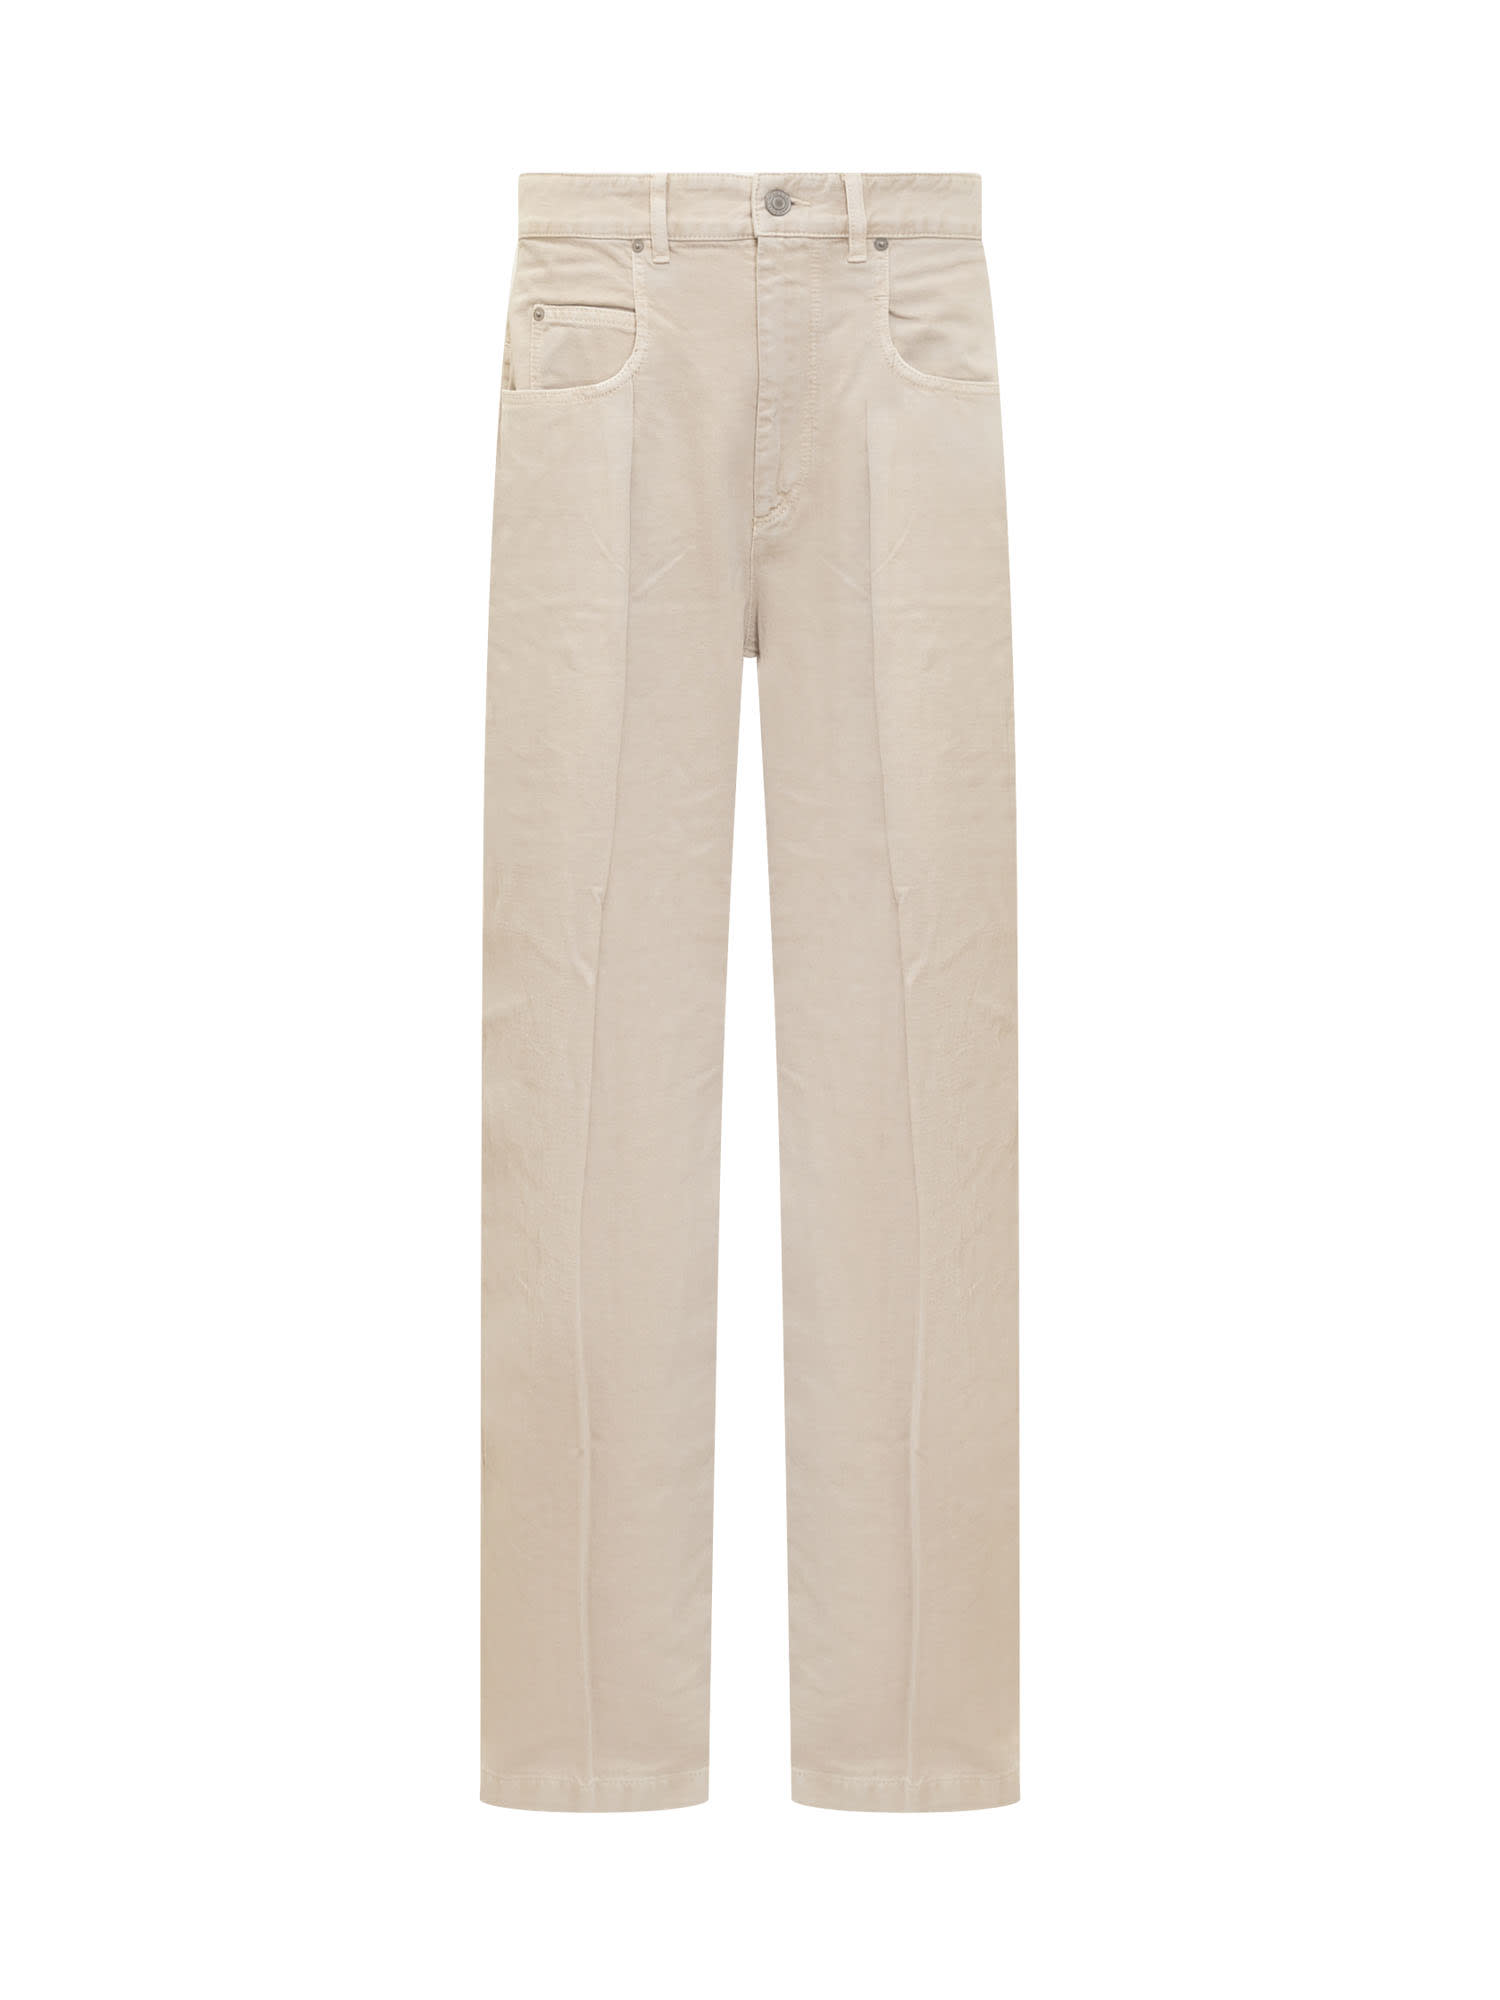 Shop Isabel Marant Janel Jeans In Neutrals